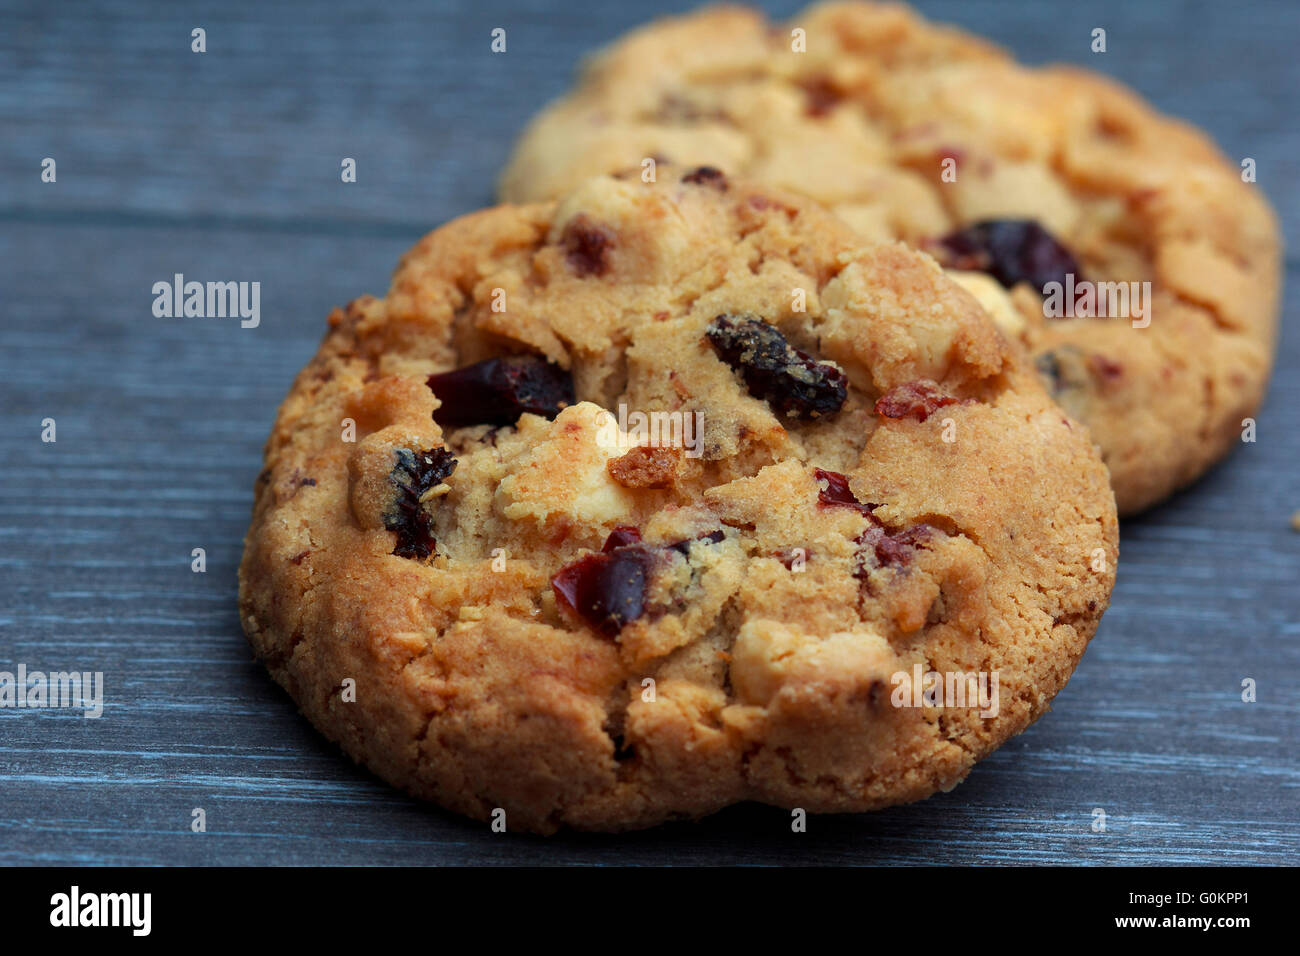 White chocolate and cranberries on rustic wooden table Stock Photo